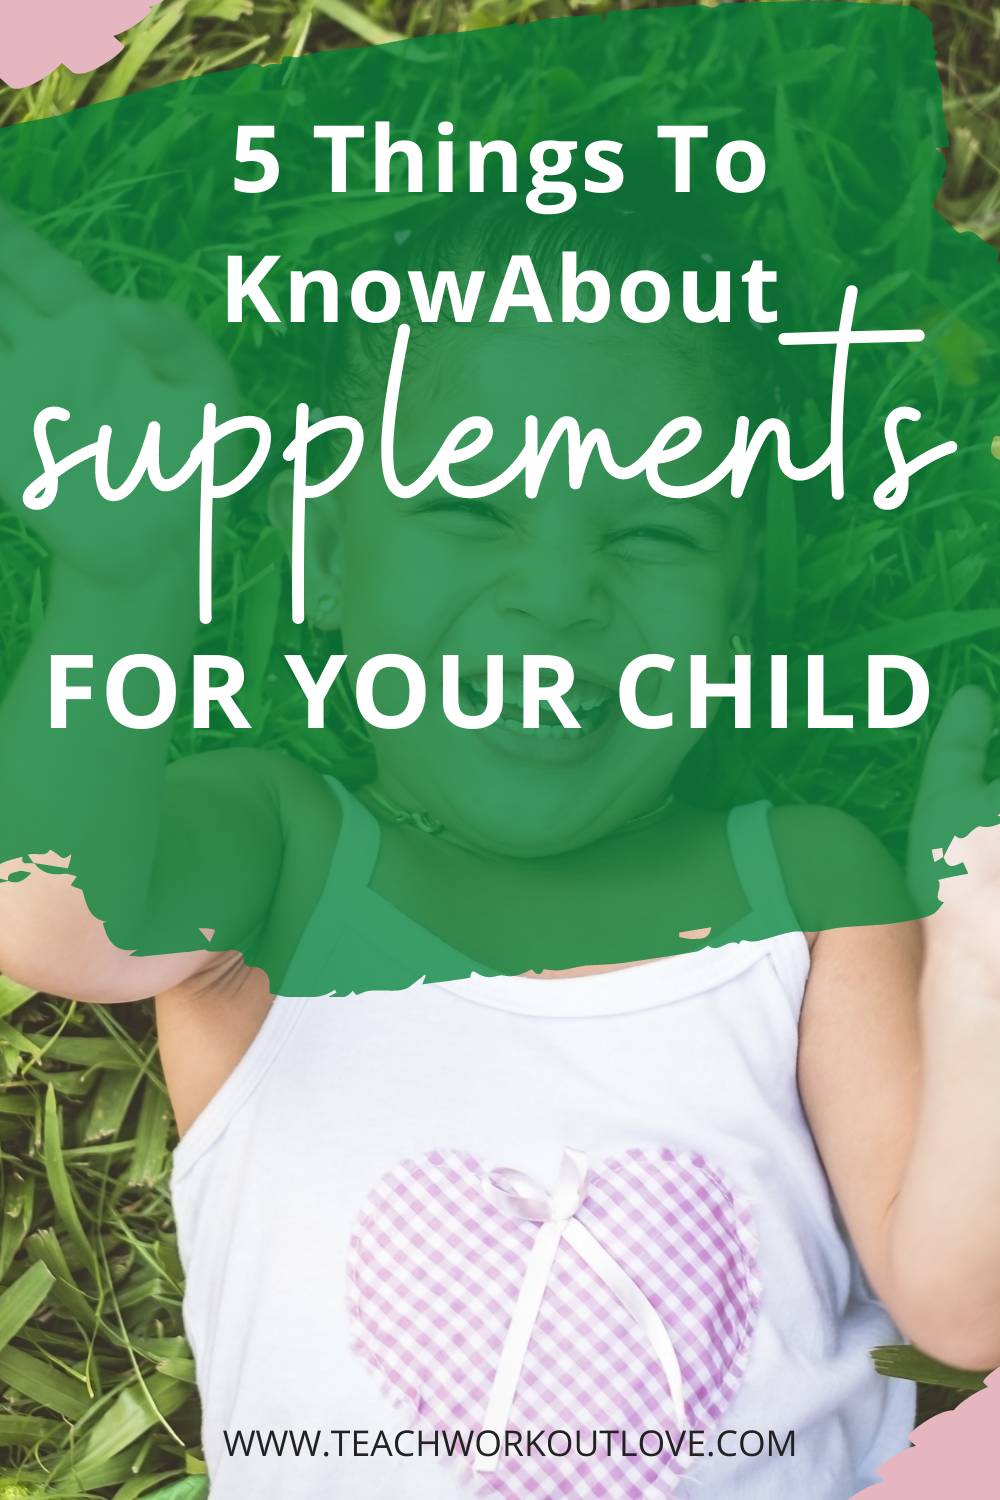 A daily supplement is used regularly to improve the health of a child or an adult. Here's all you need to know about supplements for your child.